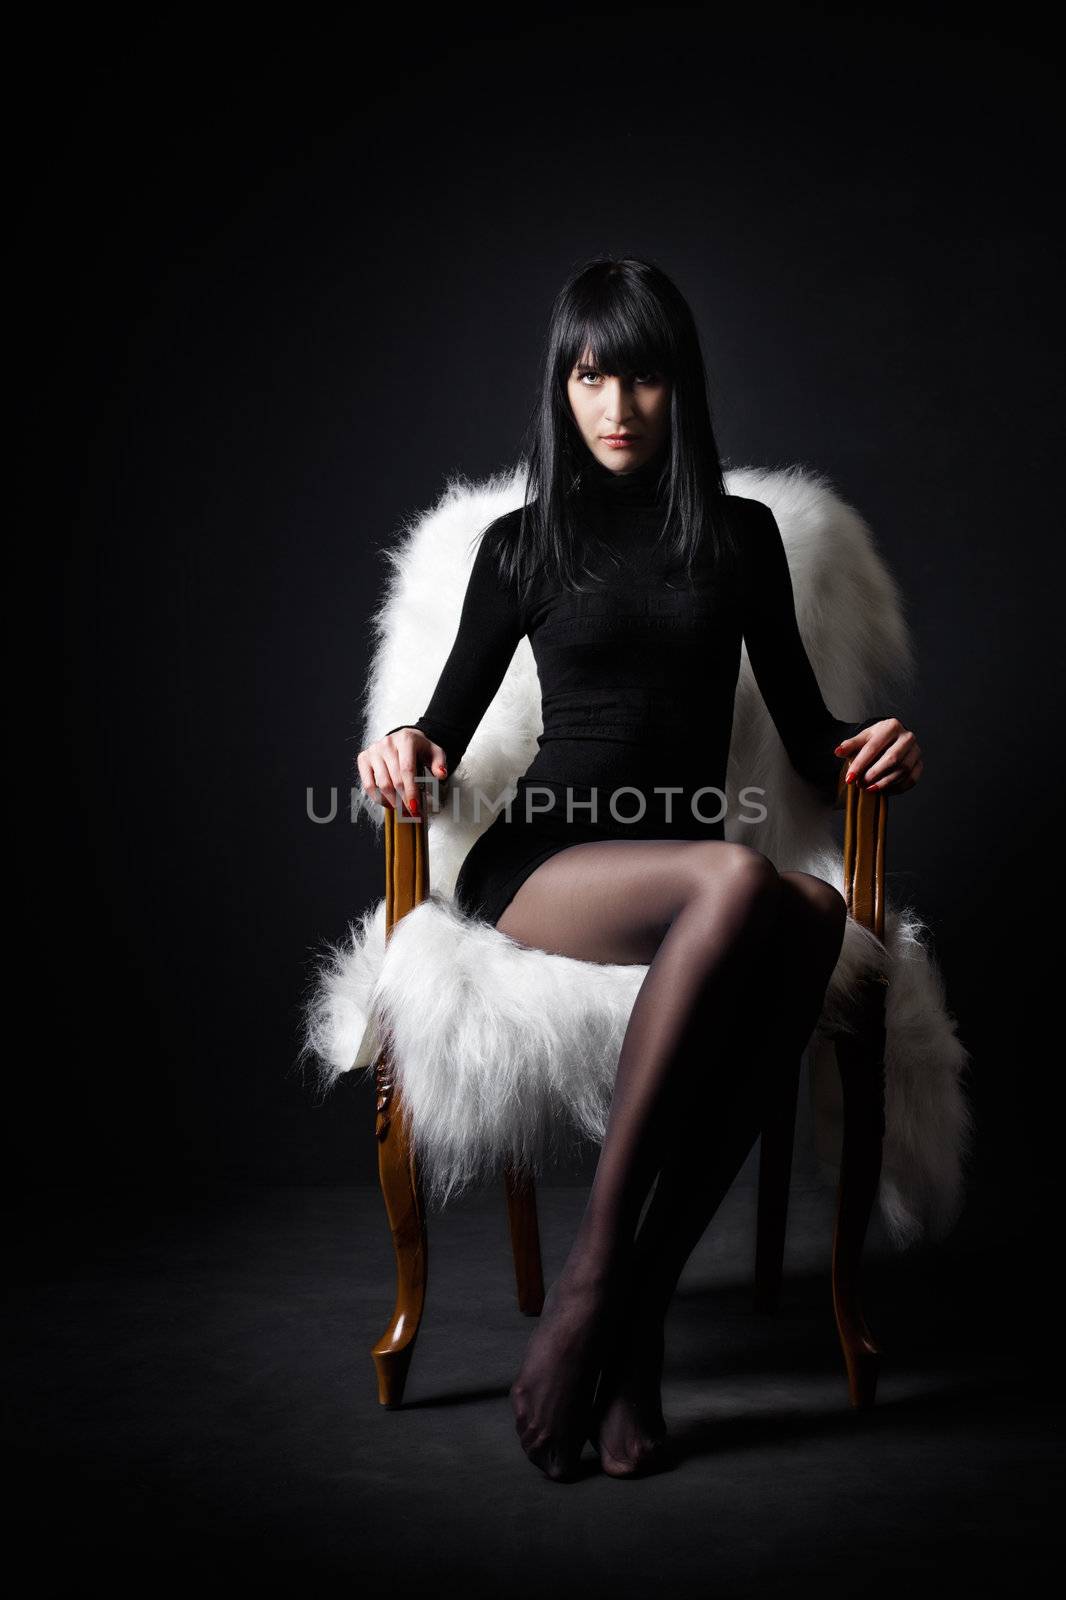 Sexy girl in a chair, black background